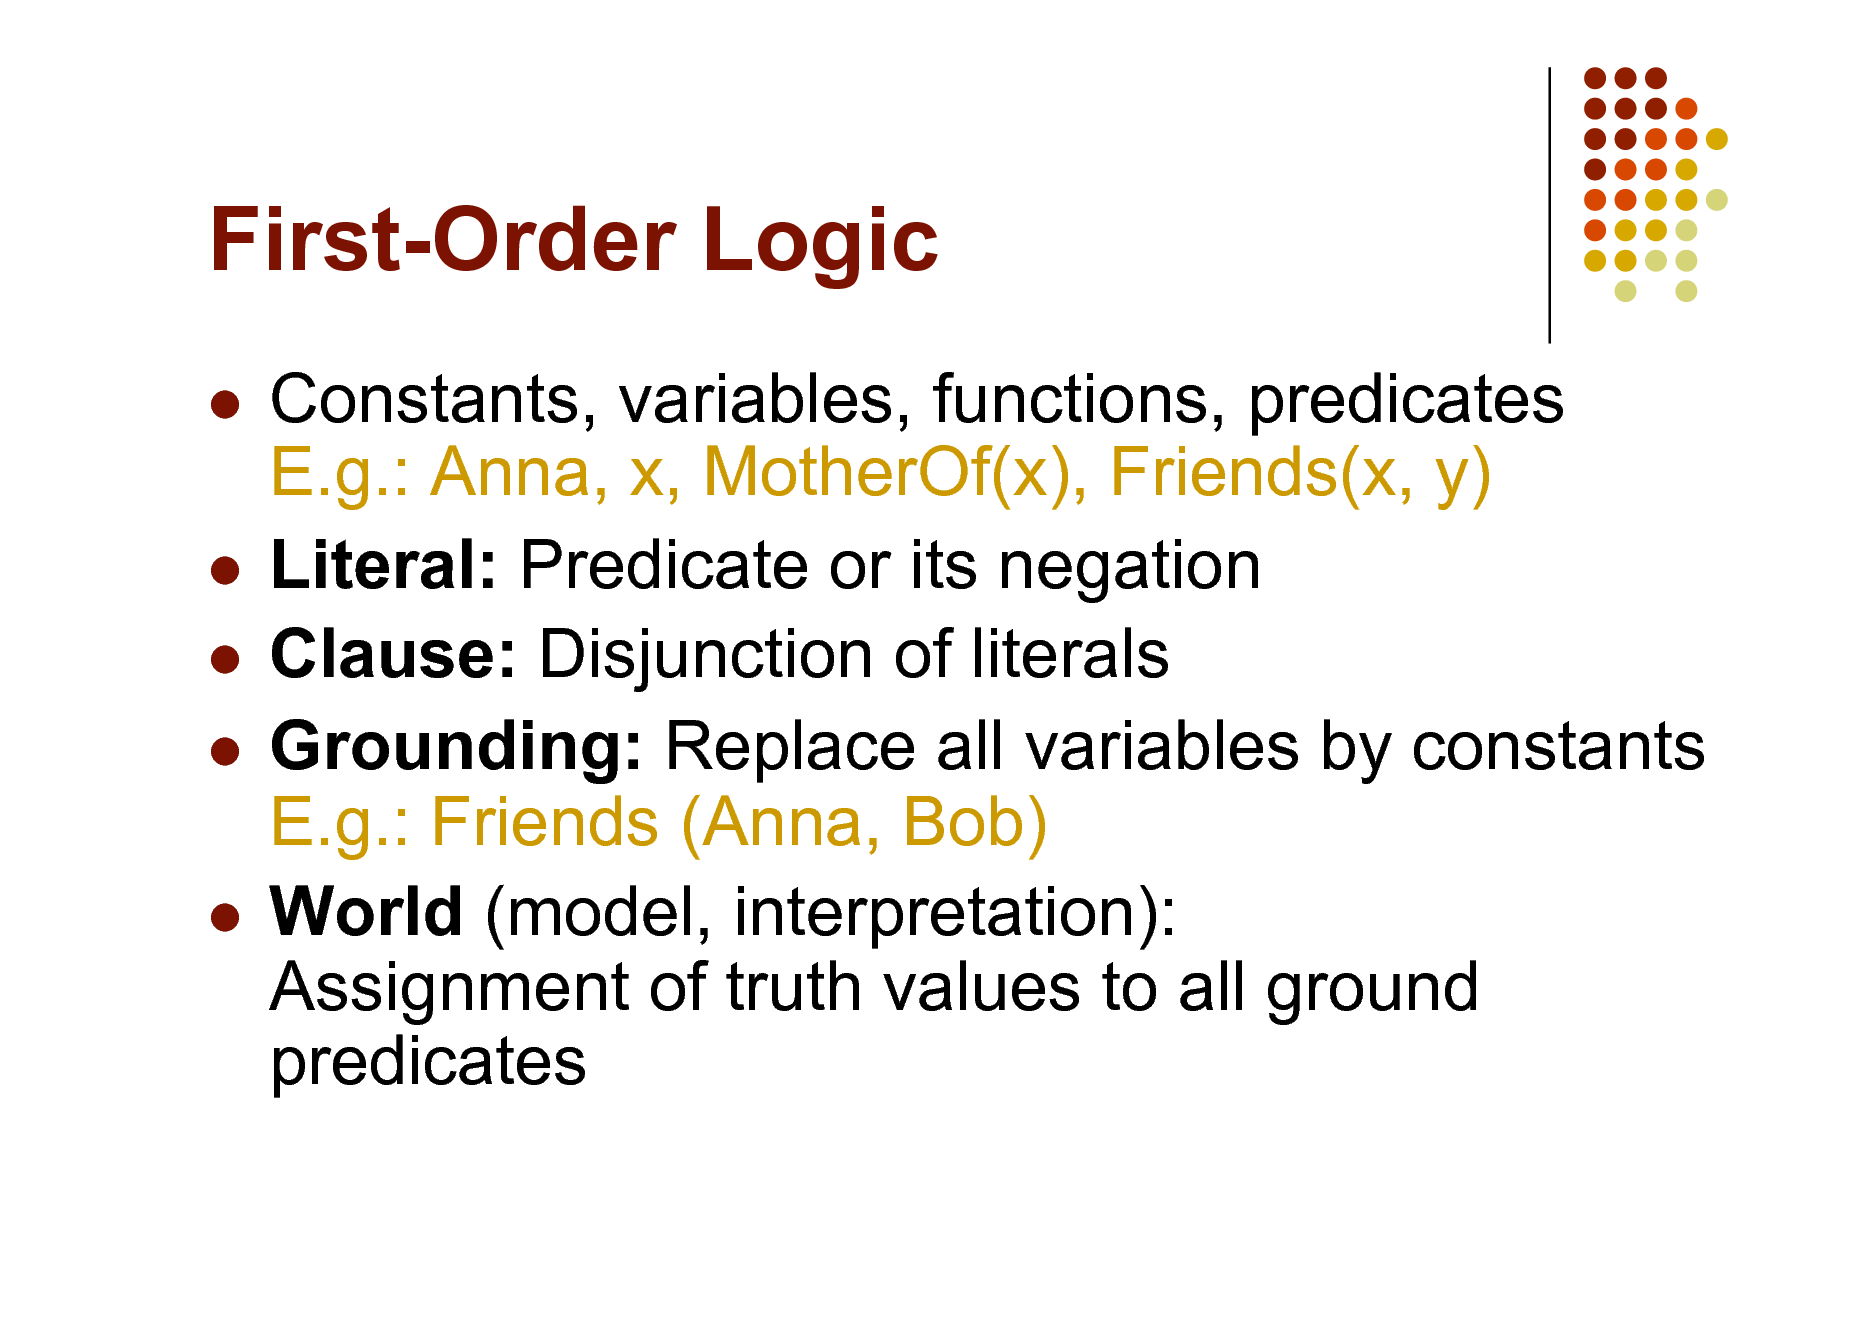 Slide: First-Order Logic
Constants, variables, functions, predicates E.g.: Anna, x, MotherOf(x), Friends(x, y)  Literal: Predicate or its negation  Clause: Disjunction of literals  Grounding: Replace all variables by constants E.g.: Friends (Anna, Bob)  World (model, interpretation): Assignment of truth values to all ground predicates


